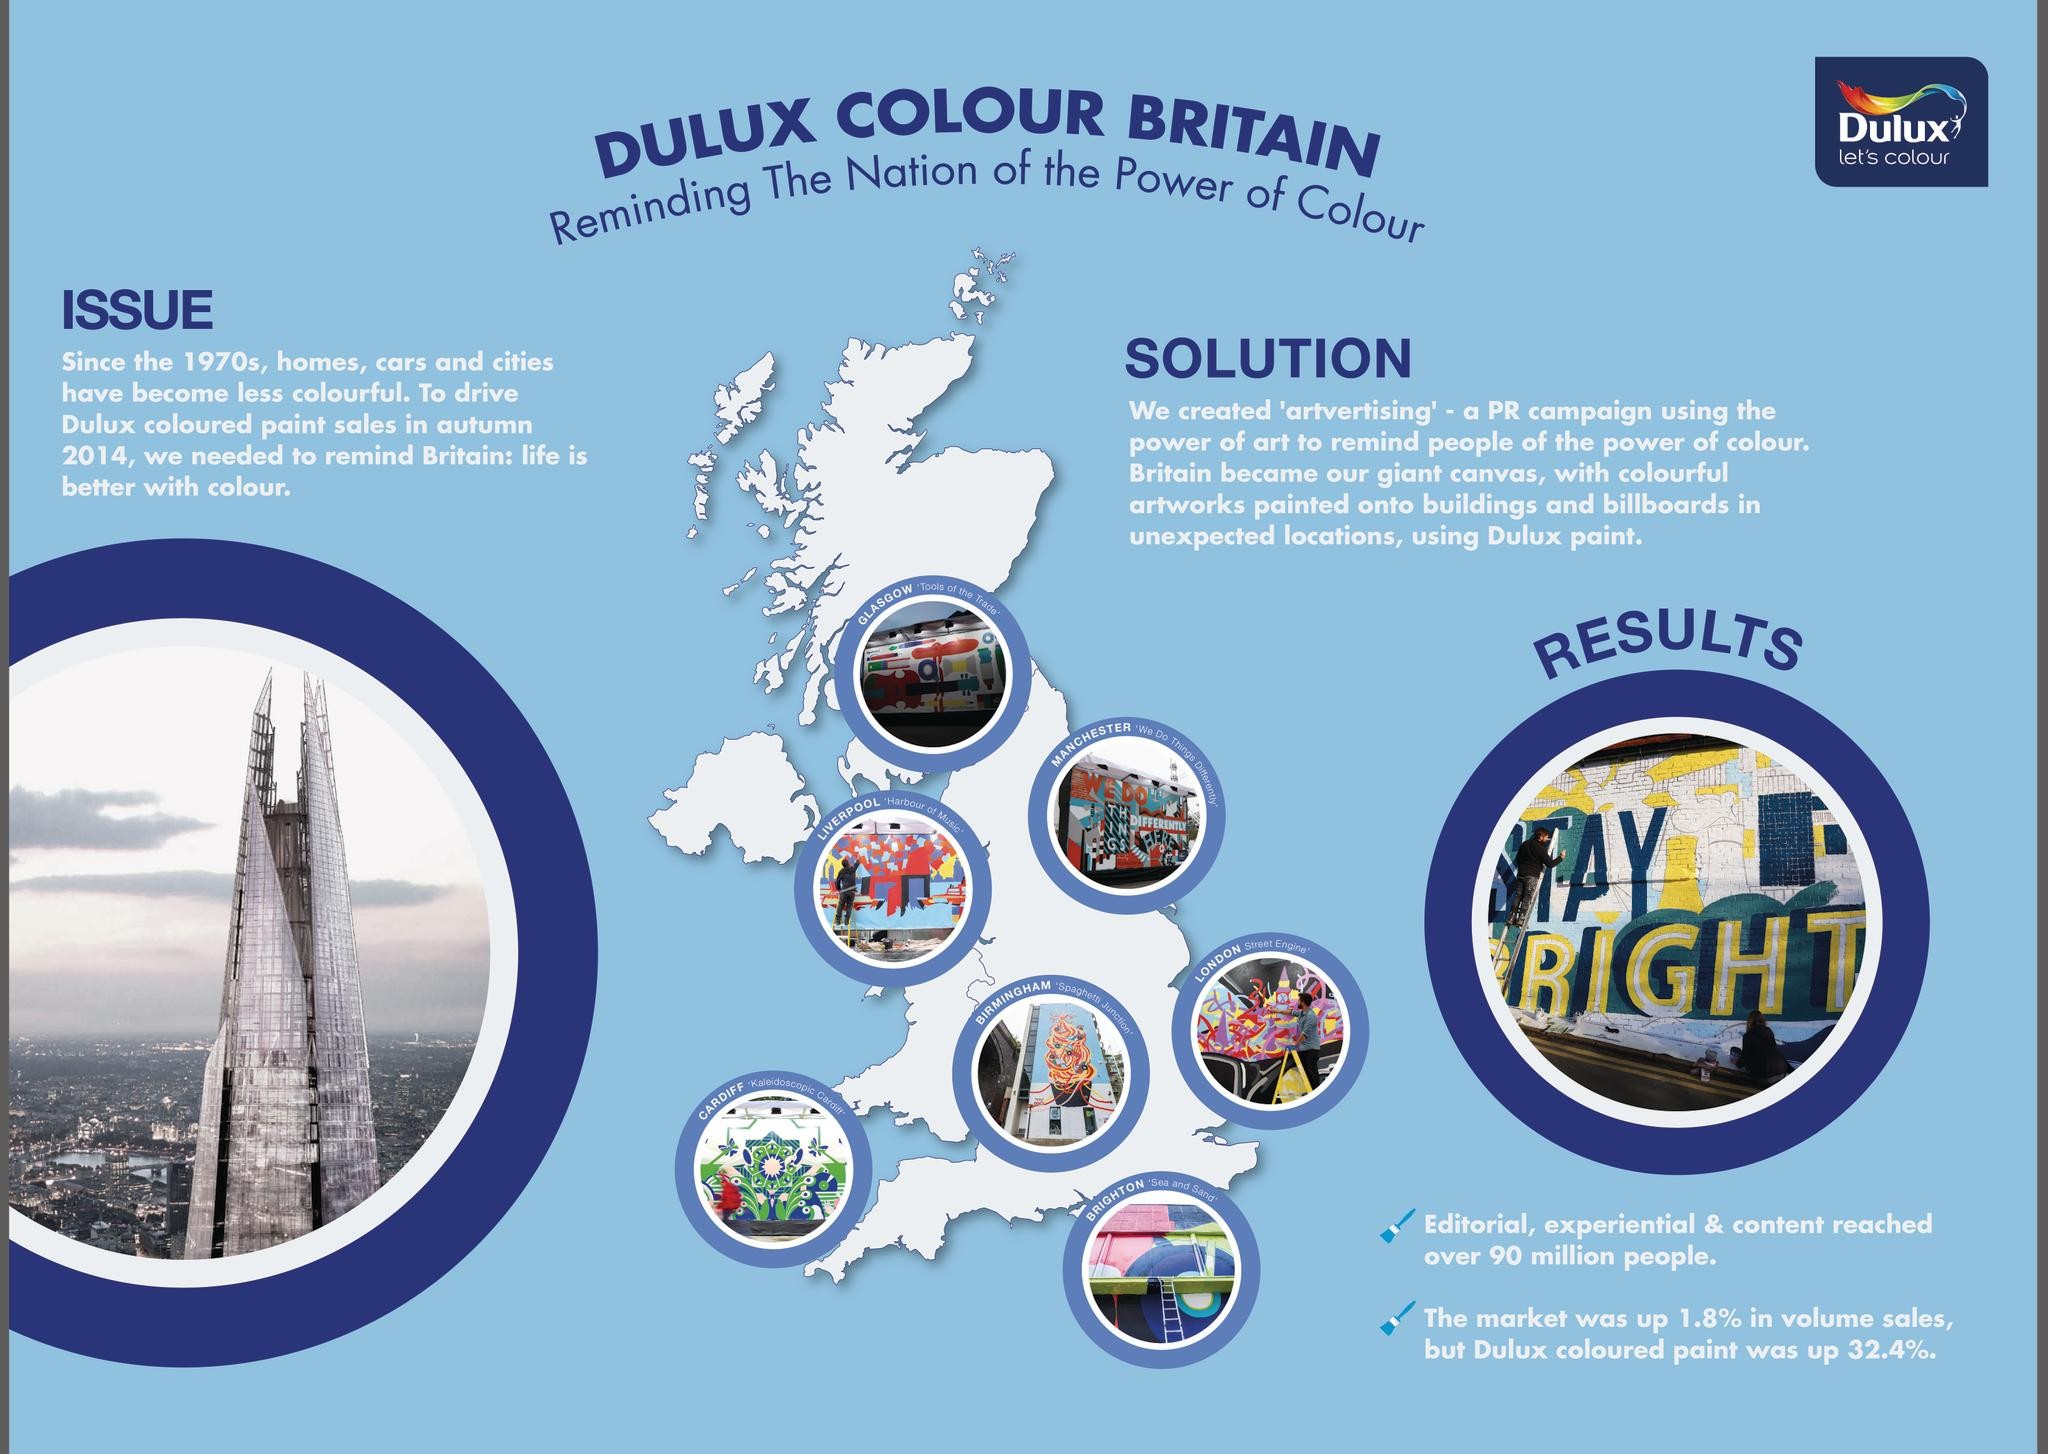 COLOUR BRITAIN - REMINDING THE NATION OF THE POWER OF COLOUR